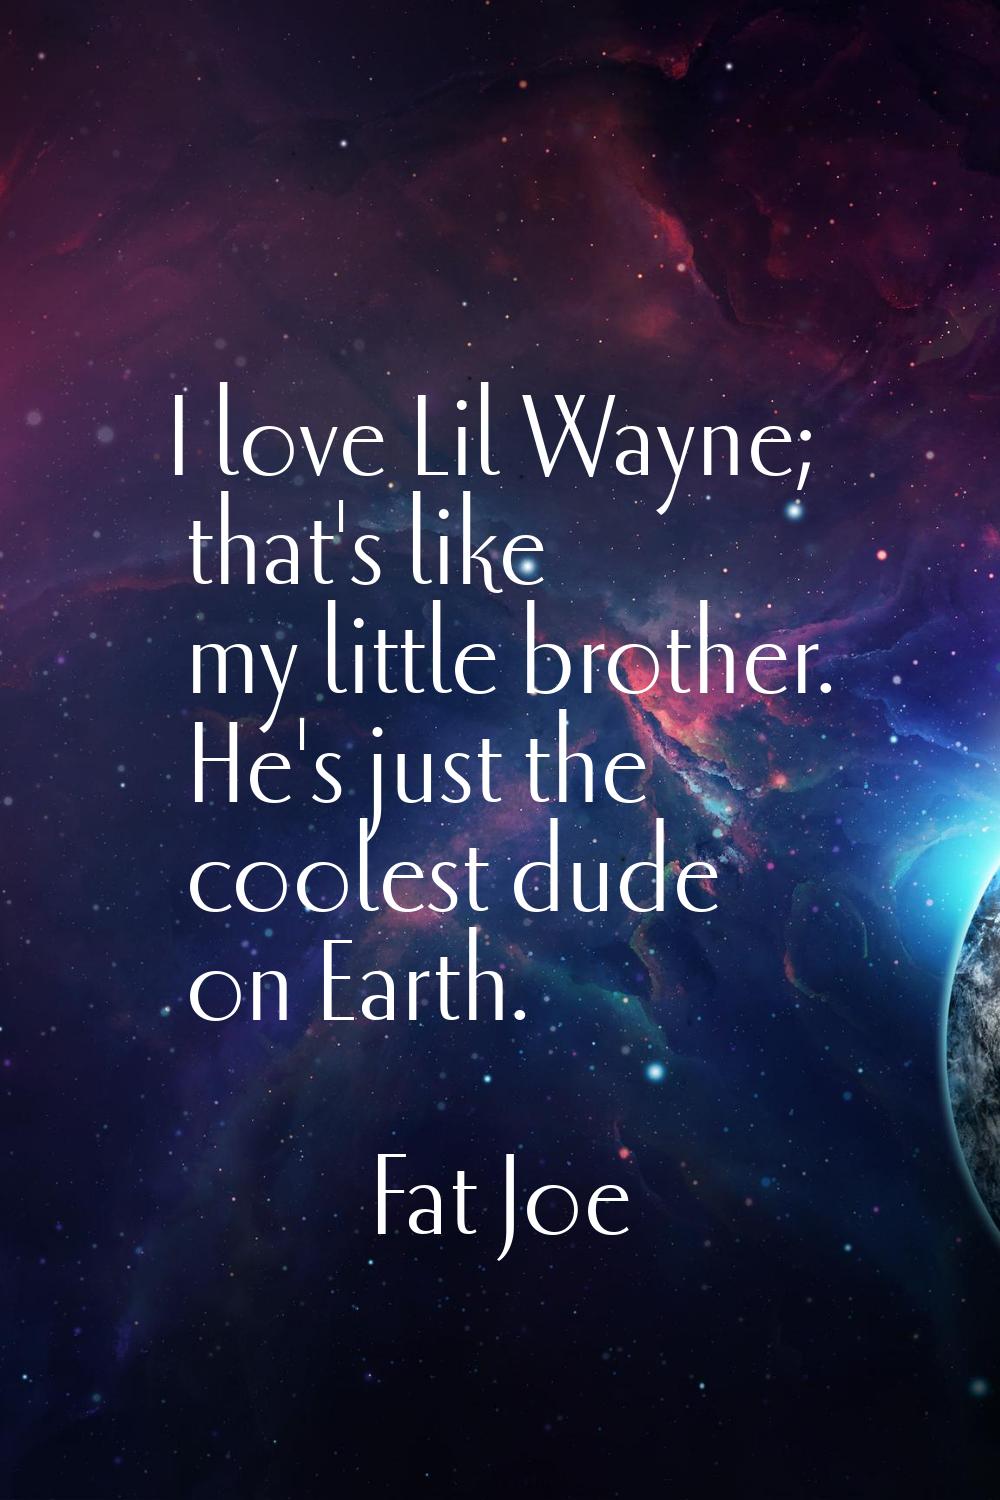 I love Lil Wayne; that's like my little brother. He's just the coolest dude on Earth.